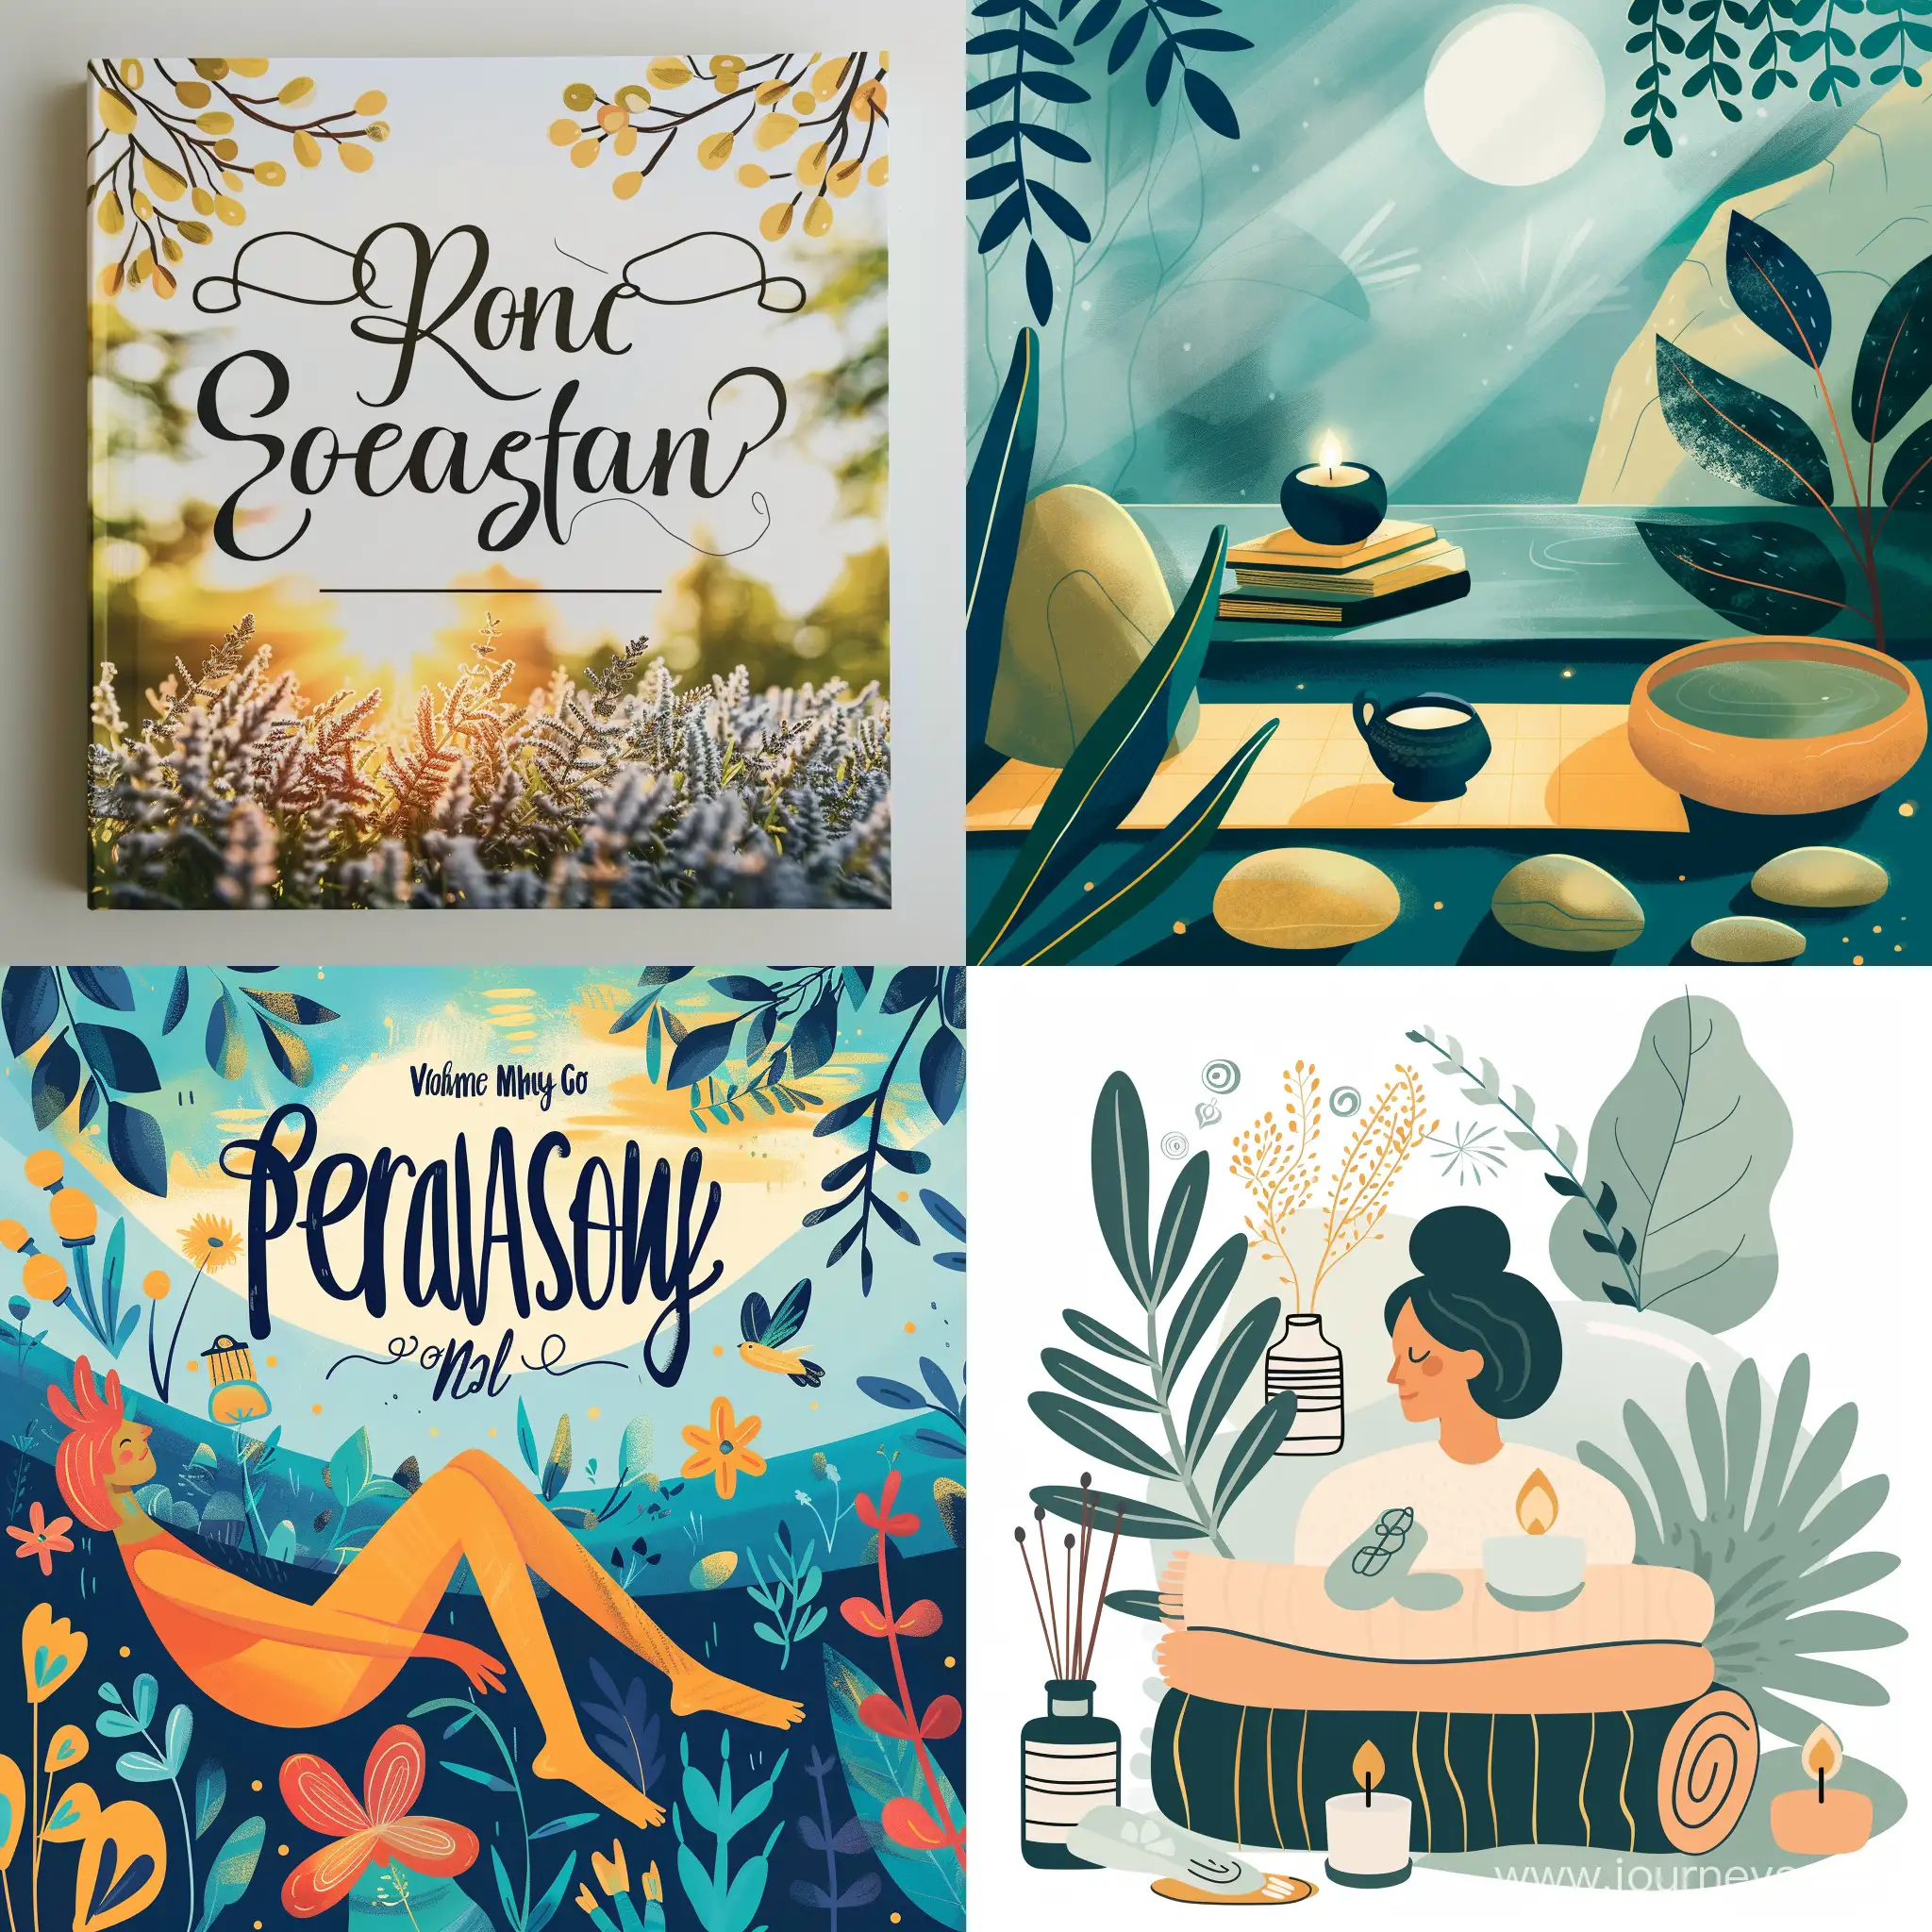 You are a book cover designer tasked with creating a cover for a book with a relaxation theme. The cover should visually convey a sense of tranquility, peace, and relaxation to potential readers. Consider incorporating calming colors, nature elements, or symbols associated with relaxation.